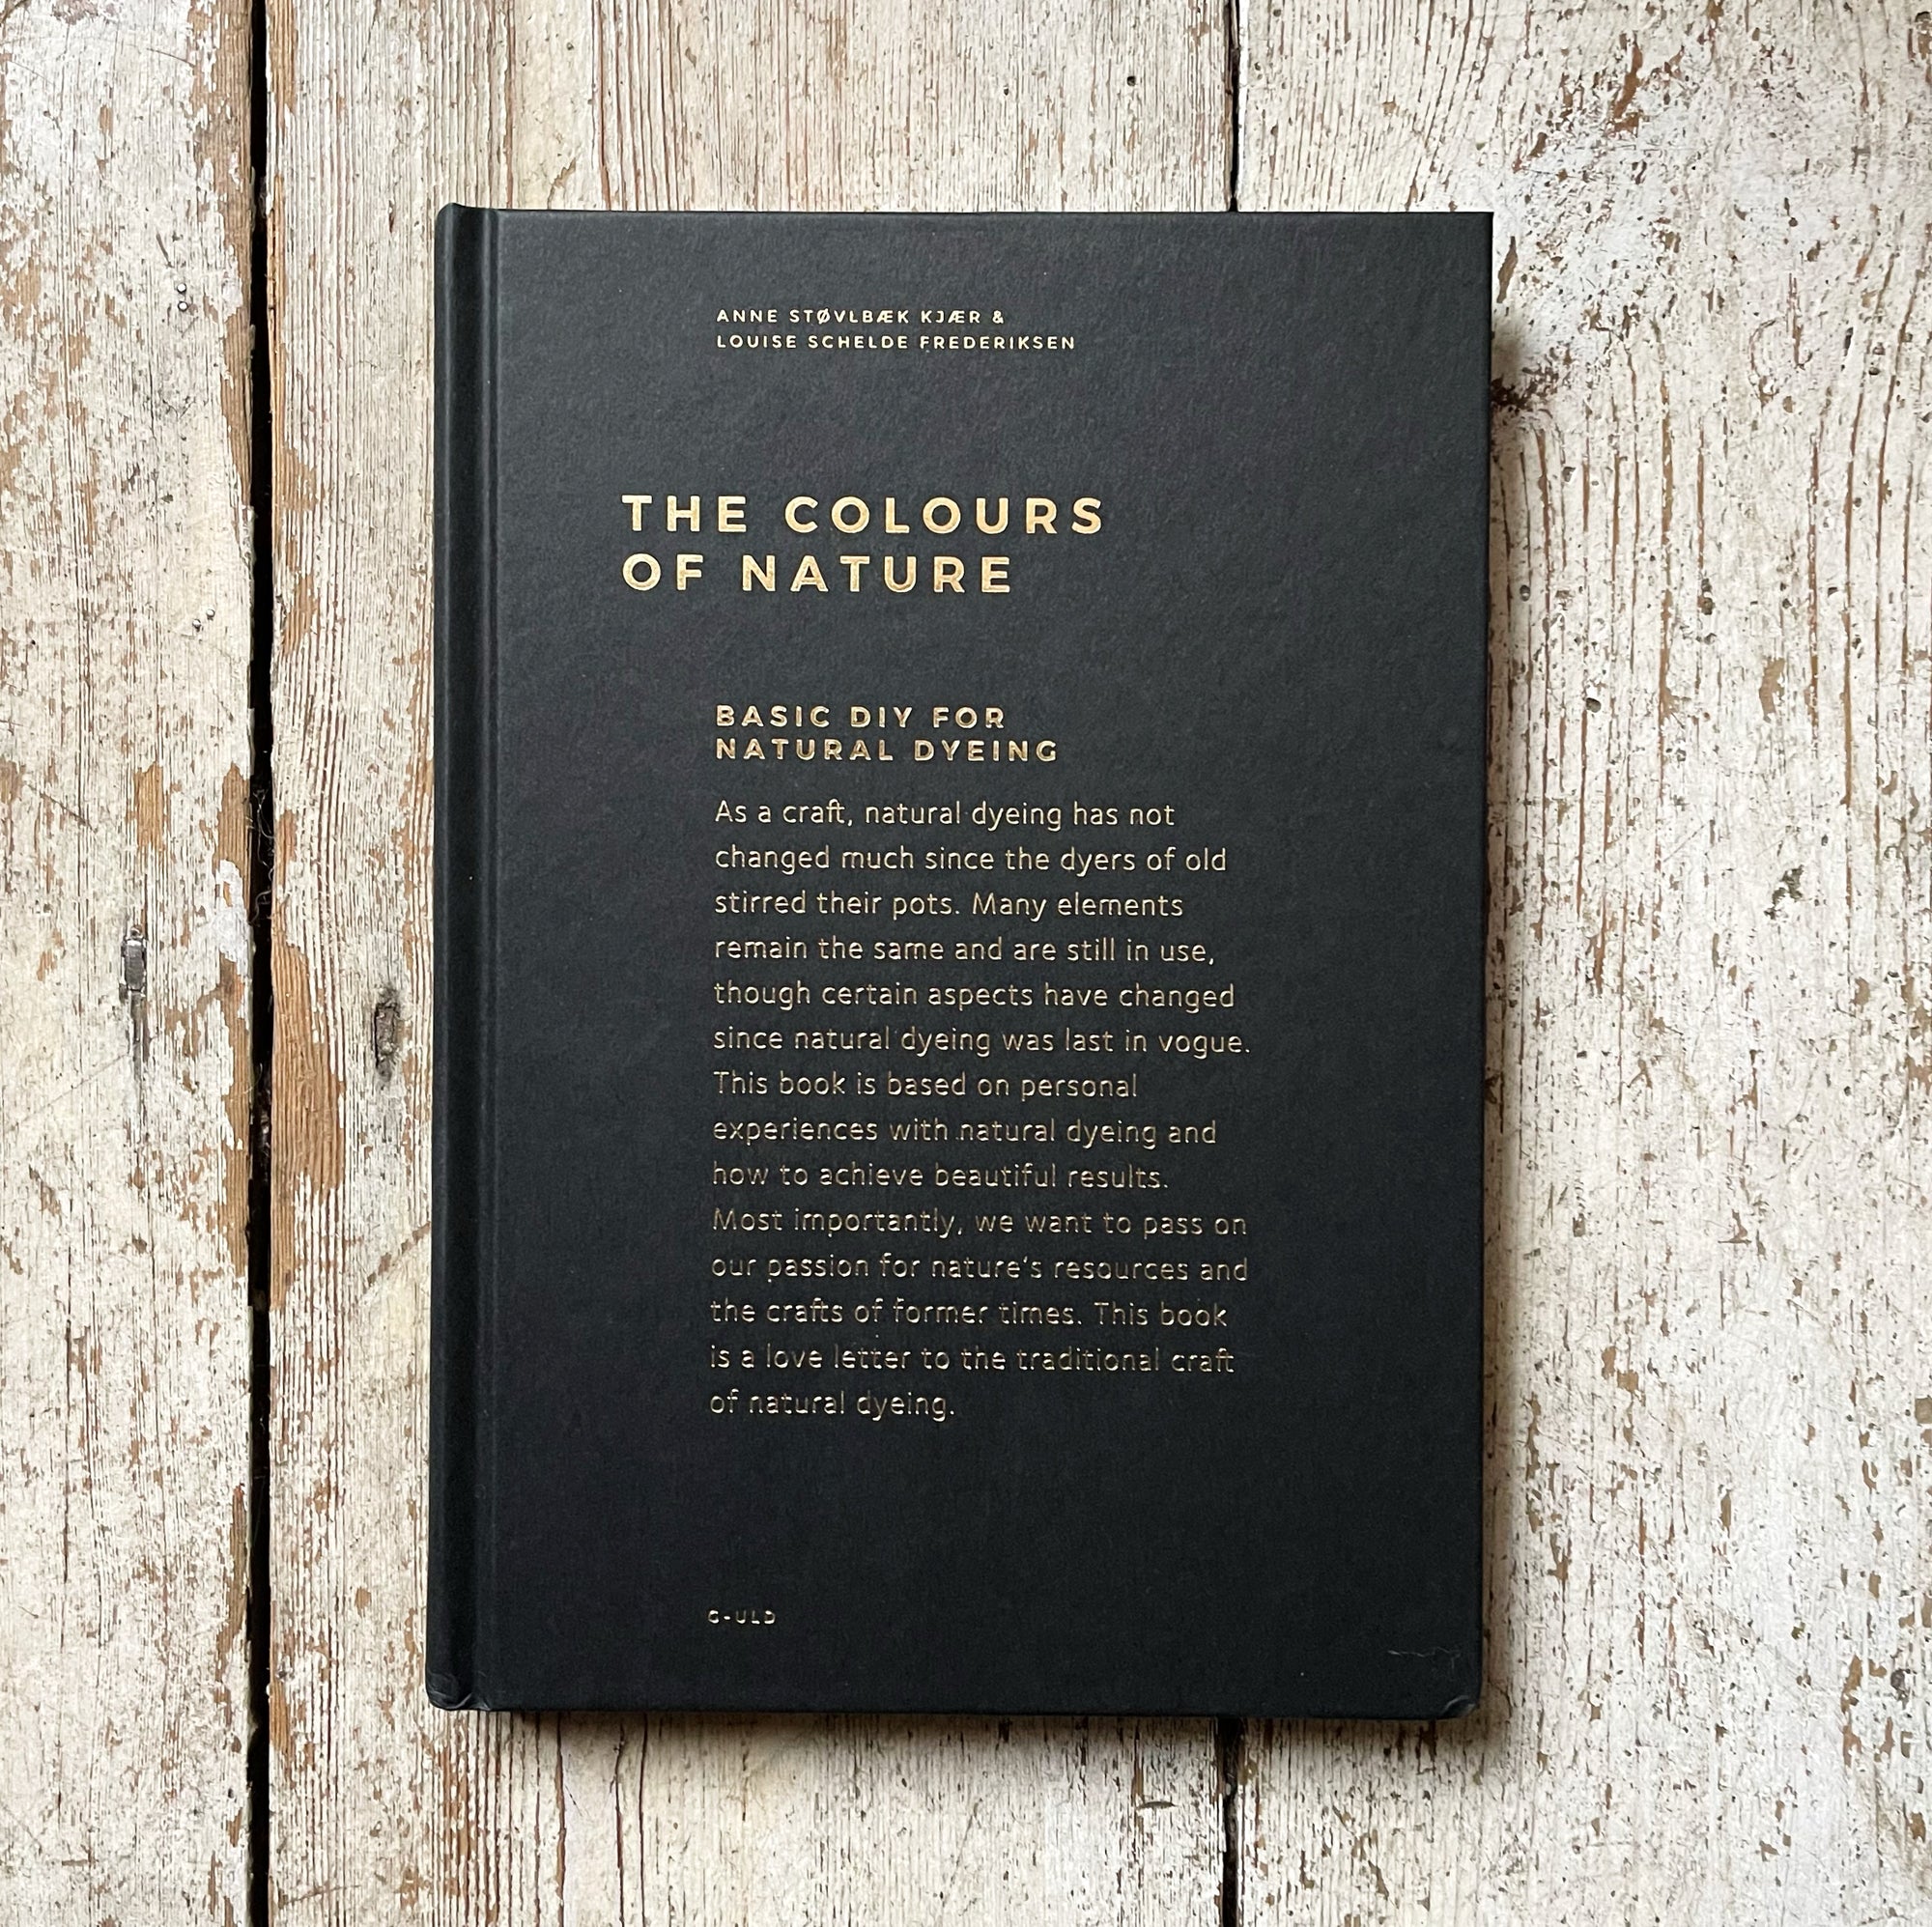 The Colours of Nature by G-uld, English Edition G-uld